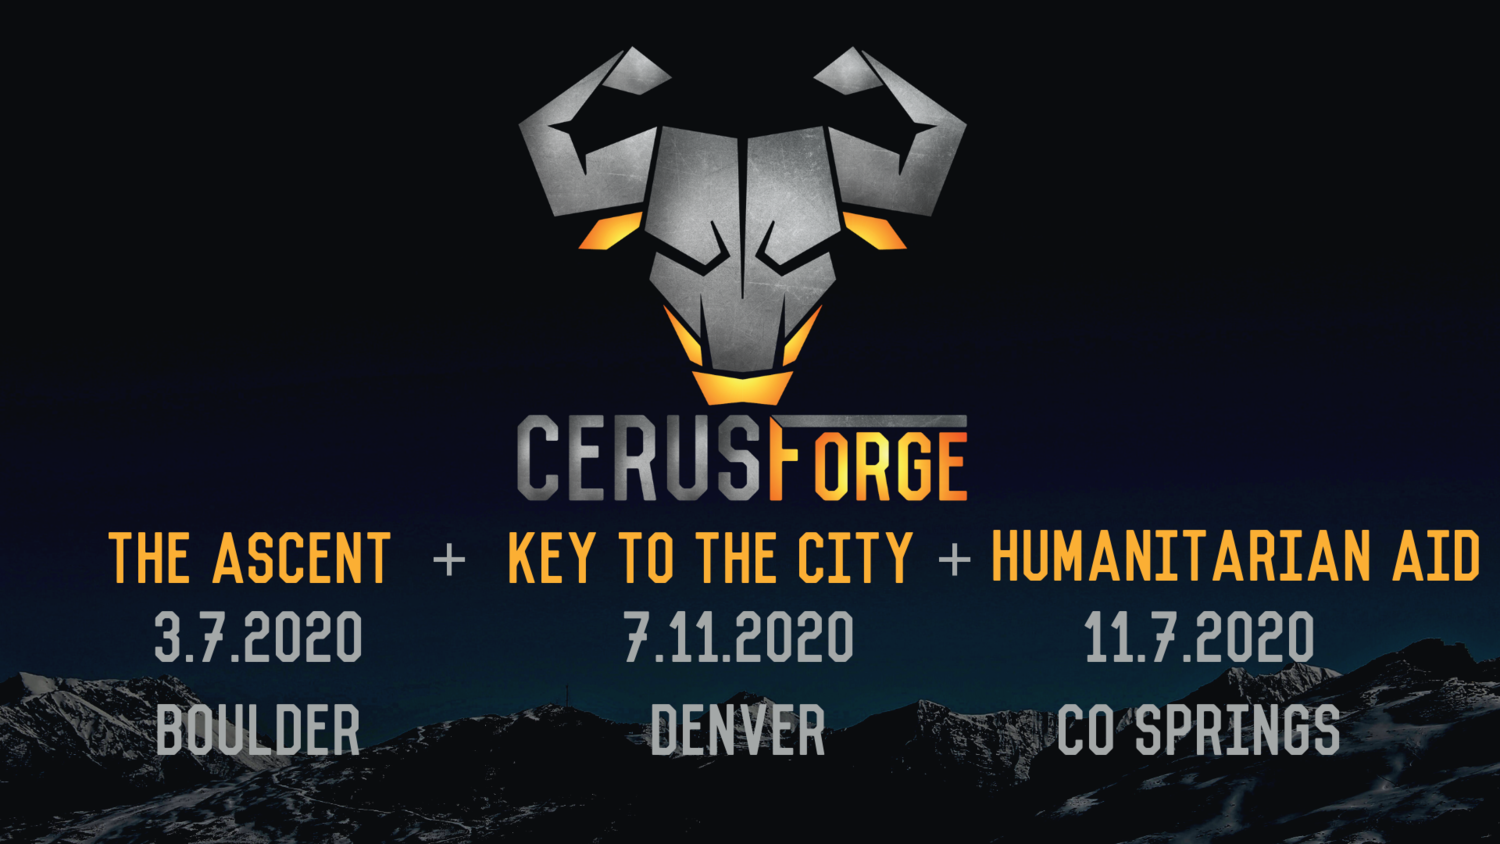 CerusForge2020: Ascent + Key to the City + Humanitarian Aid